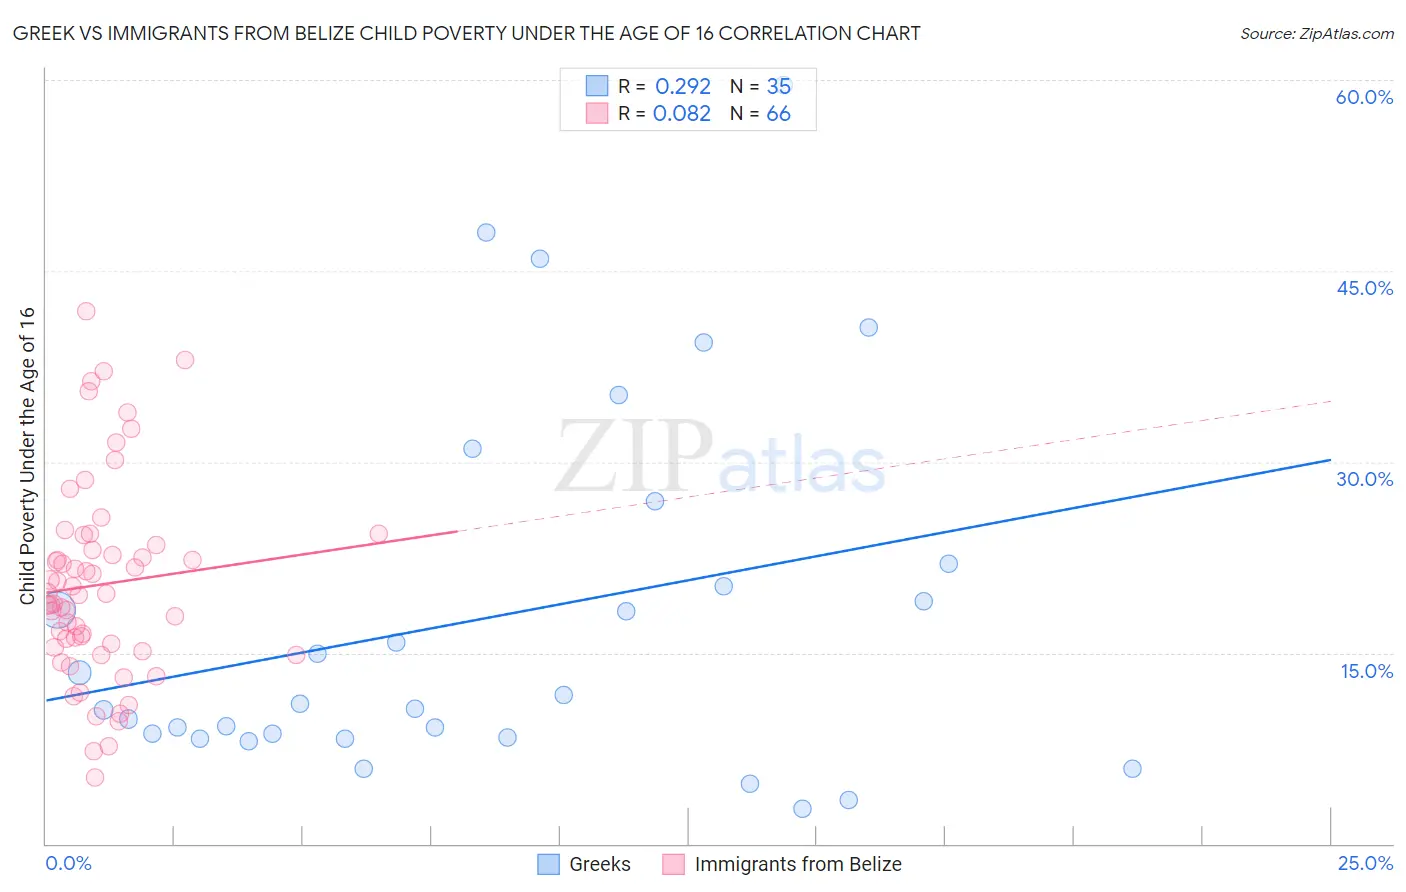 Greek vs Immigrants from Belize Child Poverty Under the Age of 16